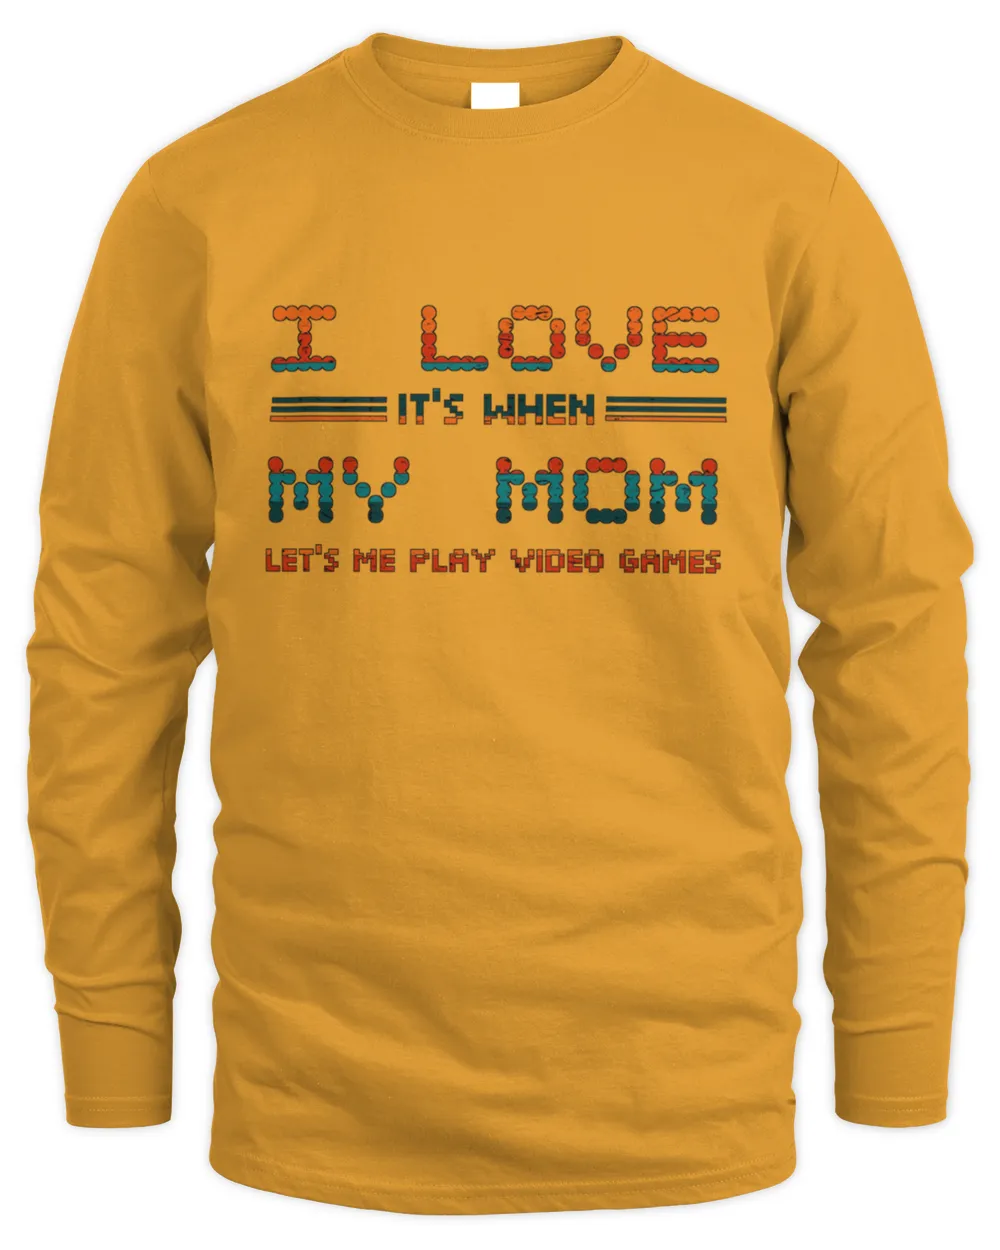 New Funny vintage video games shirt i love it when my mom lets me play video games shirt 9 T-Shirt